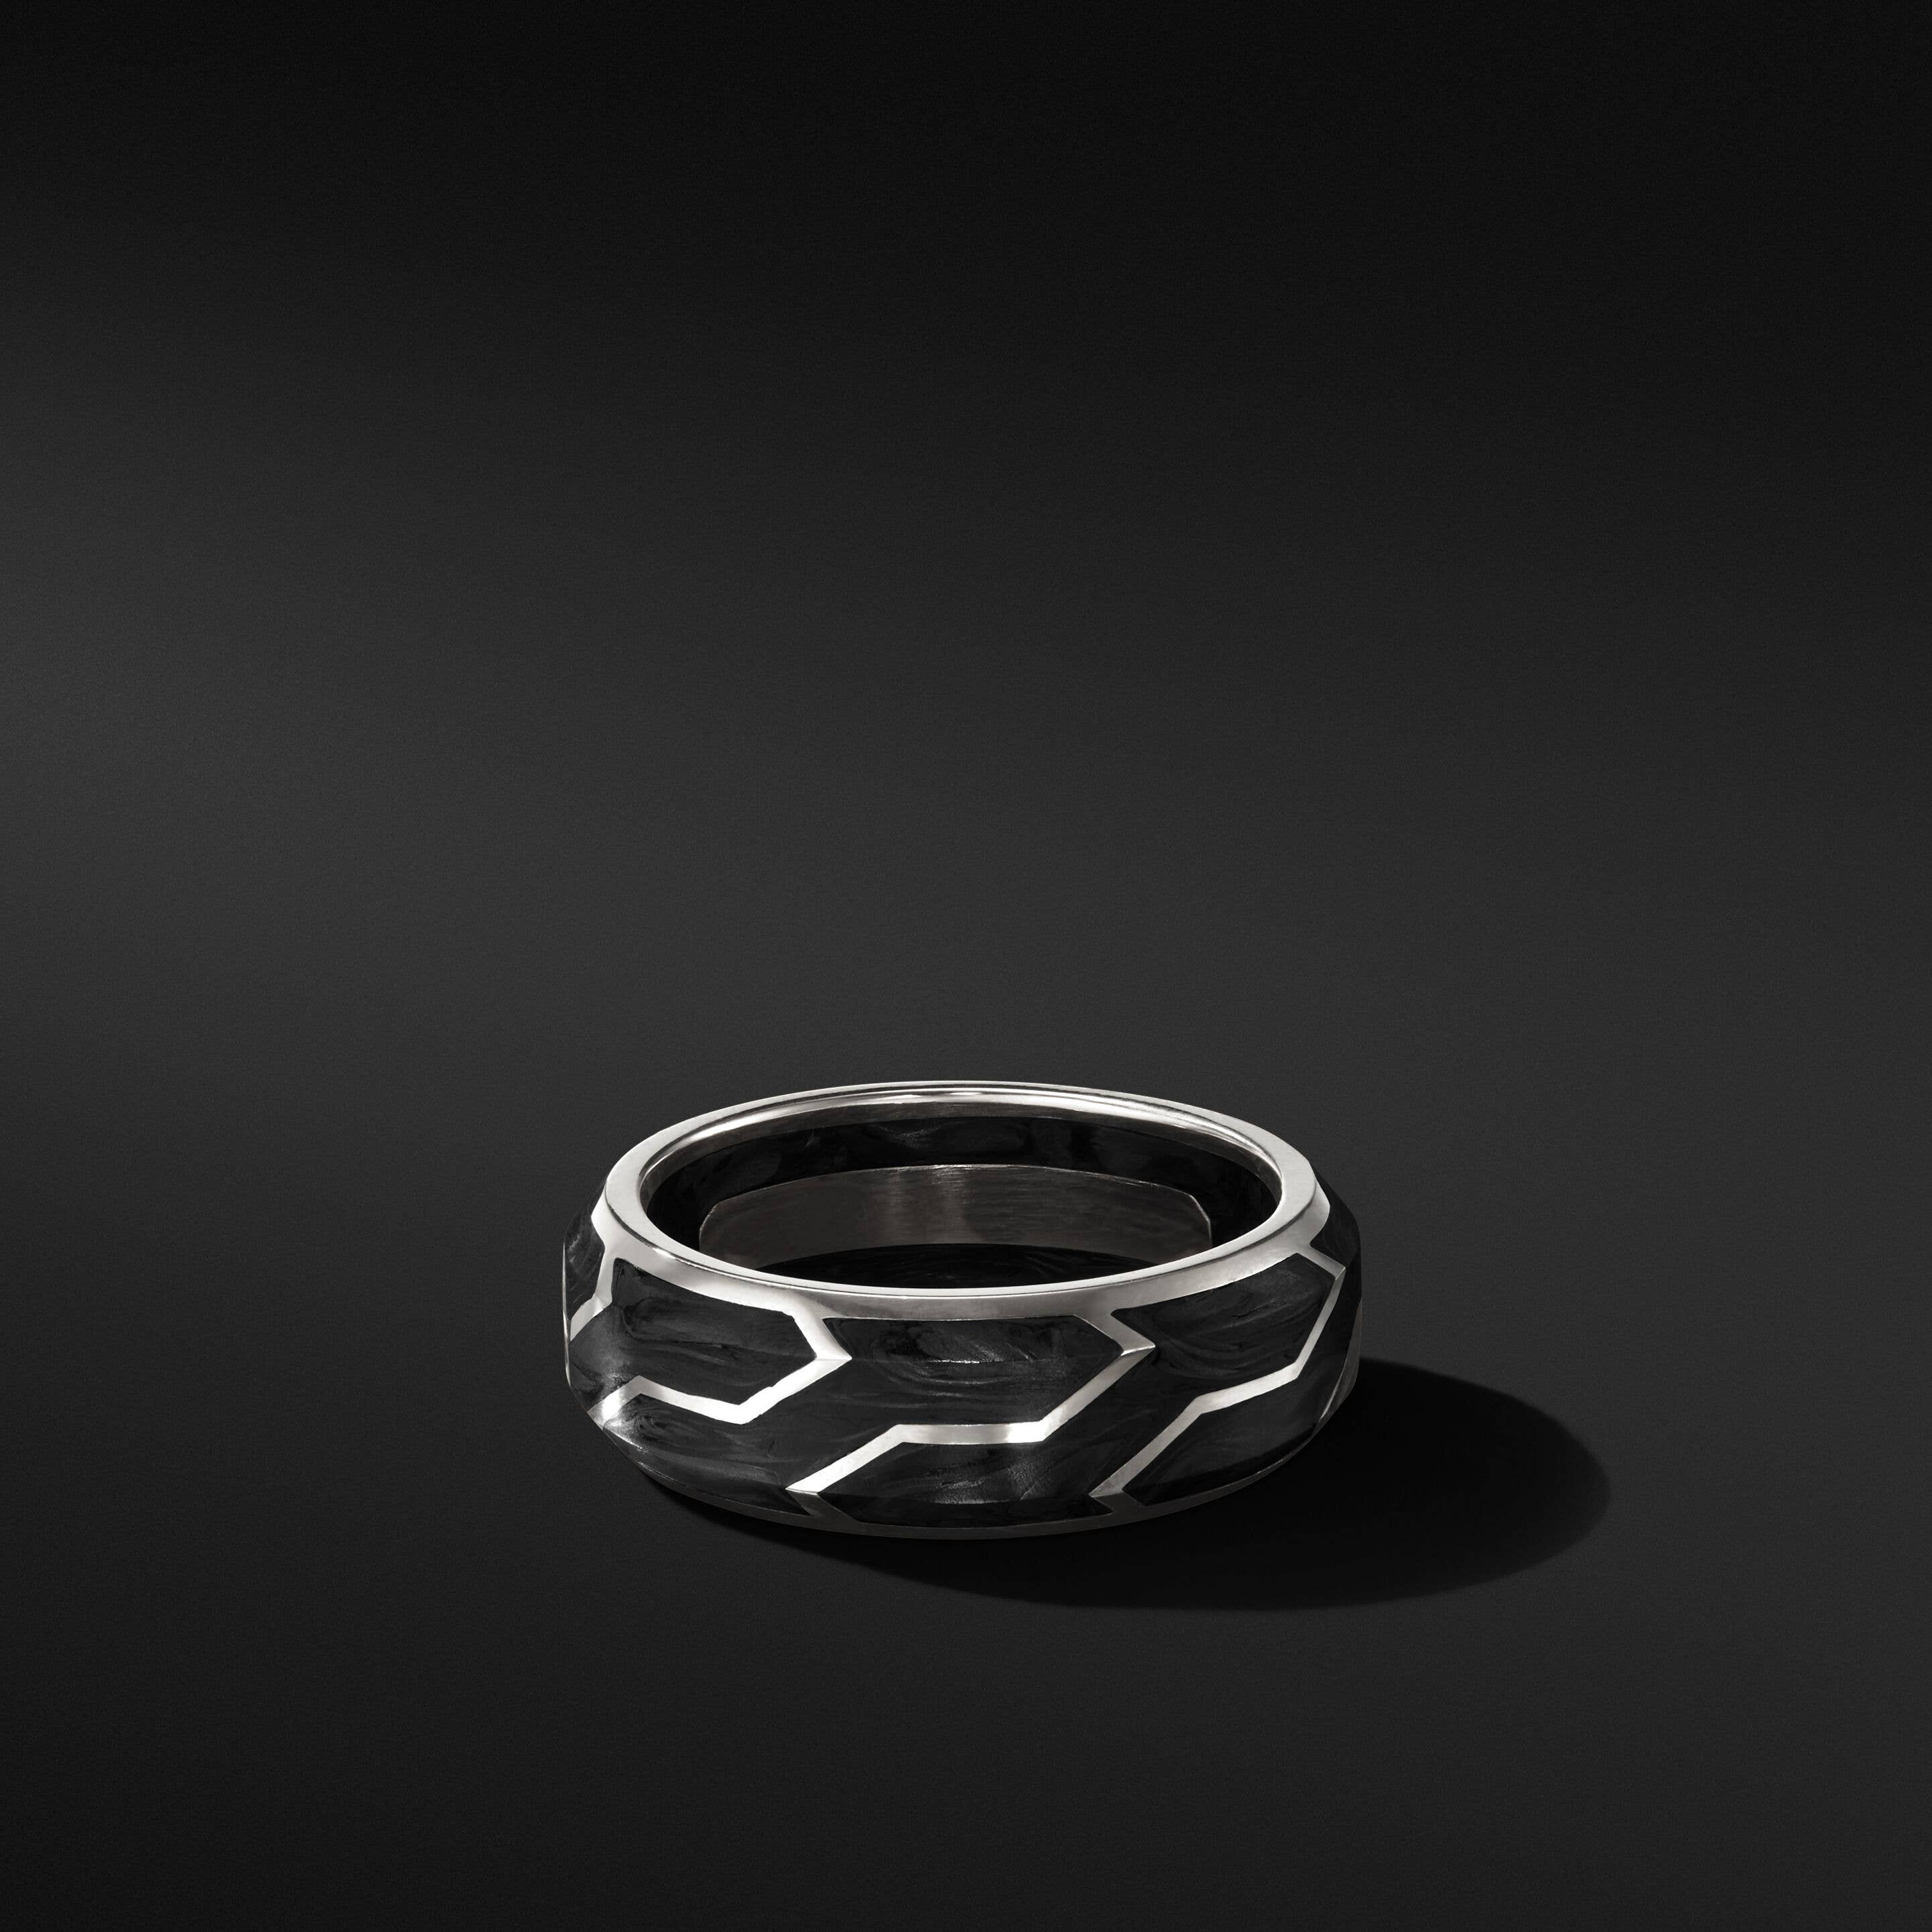 Forged Carbon Band Ring with 18K White Gold